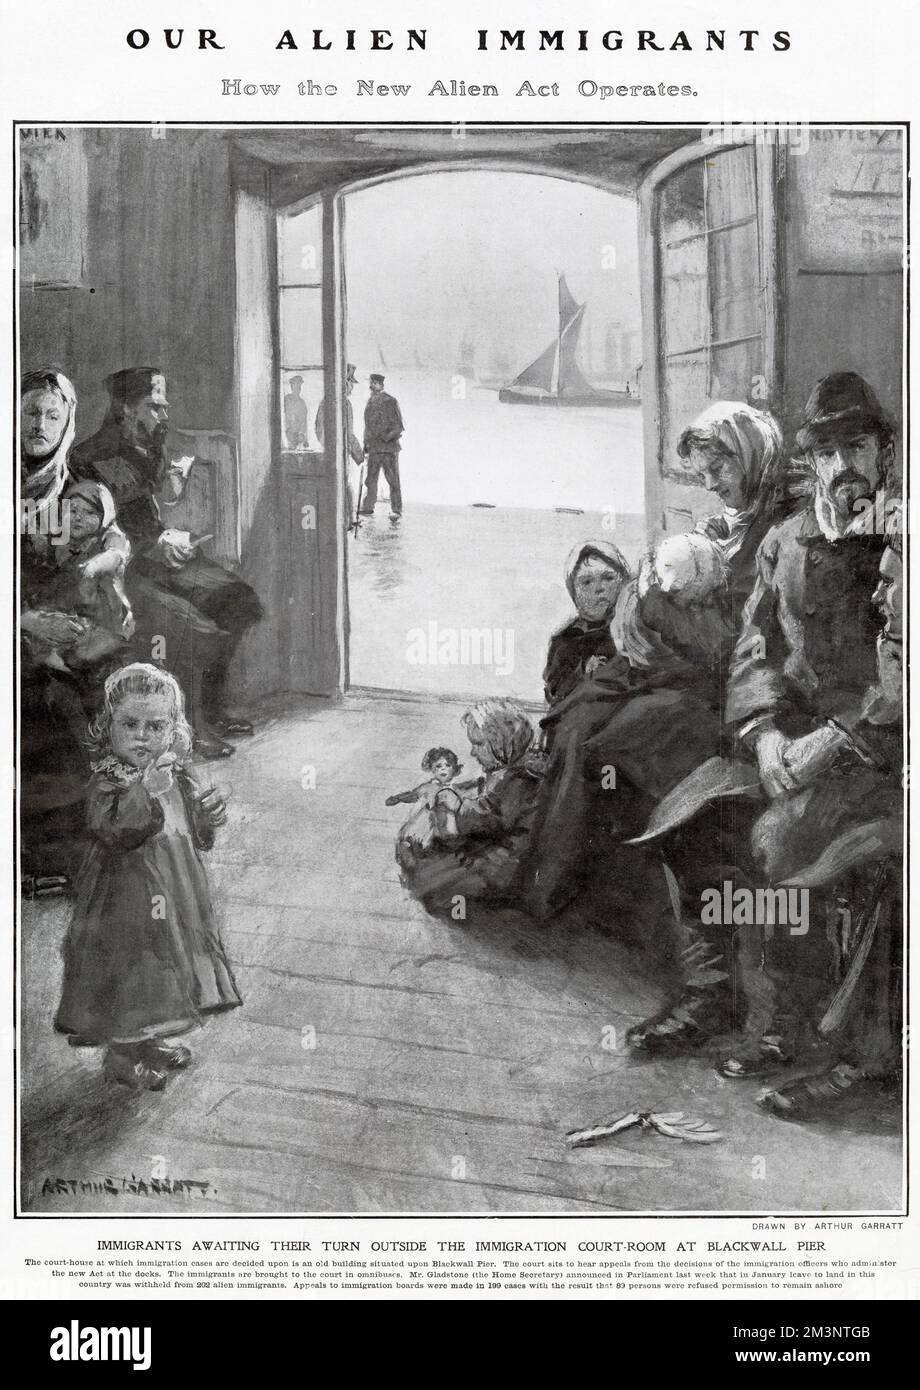 The Immigration Act of 1906 was the first legal mechanism for enforcing a policy of selective categories of prohibited immigrants and it put into law the right of the government to deport undesirables. Drawing showing immigrate families at a court-house at Blackwall Pier, East India Docks, appealing to remain in Britain. Stock Photo